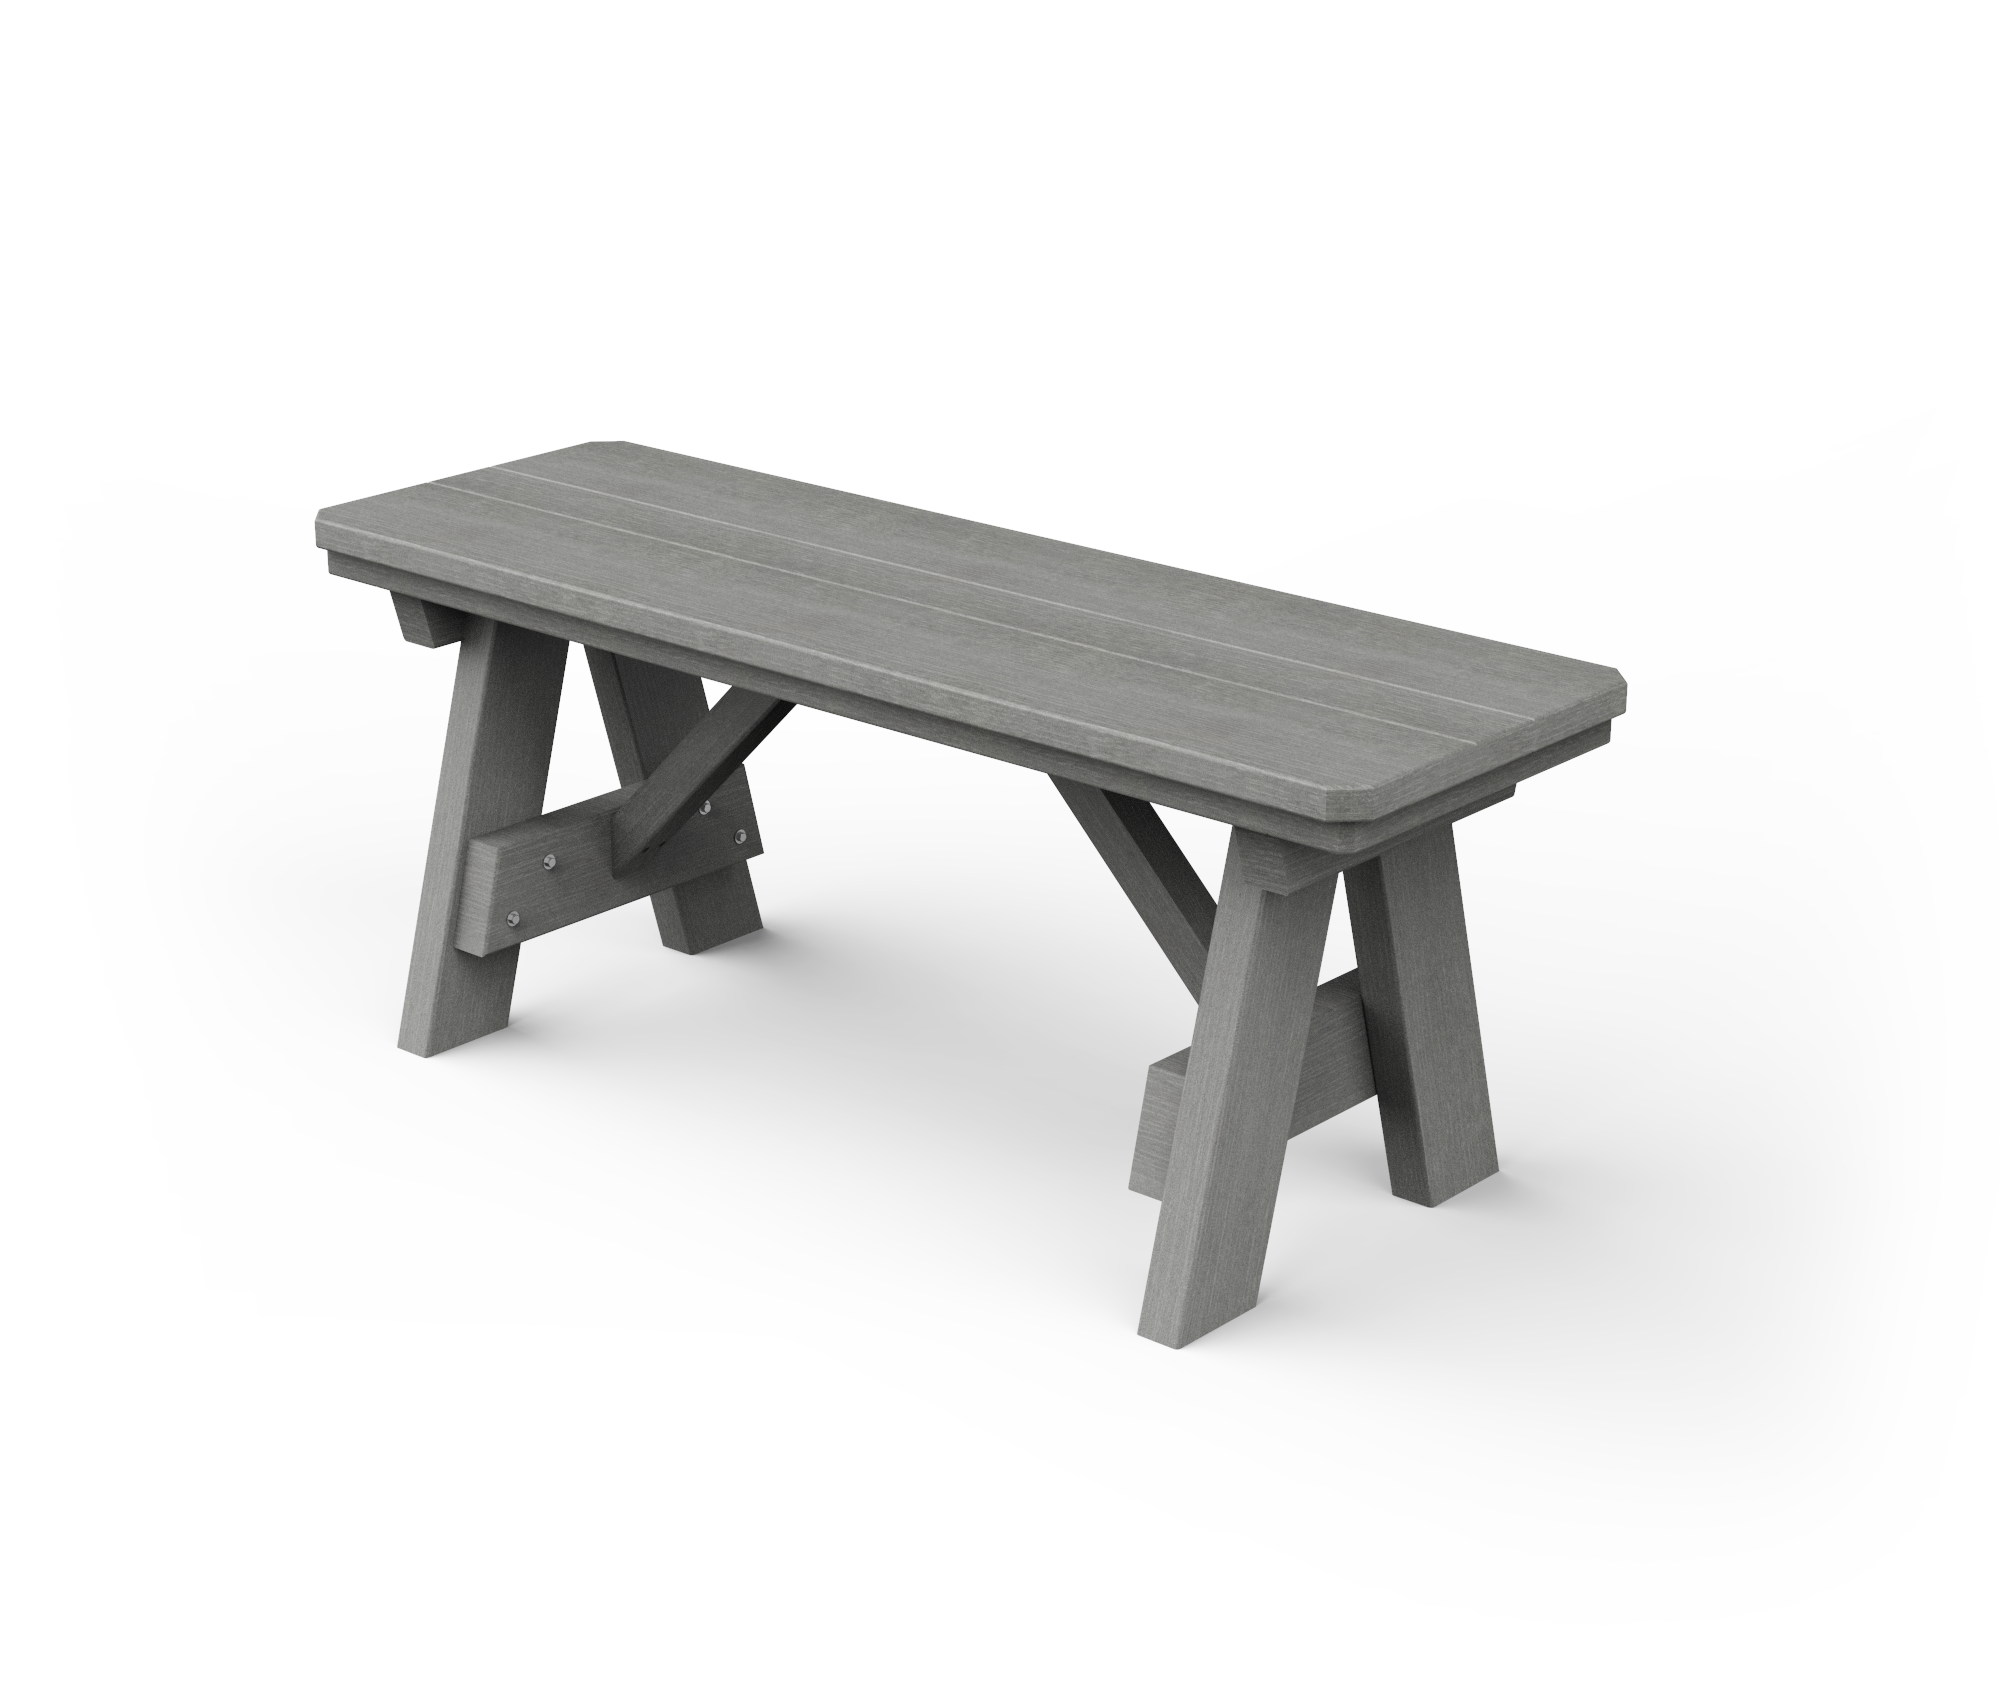 Poly dining picnic bench.